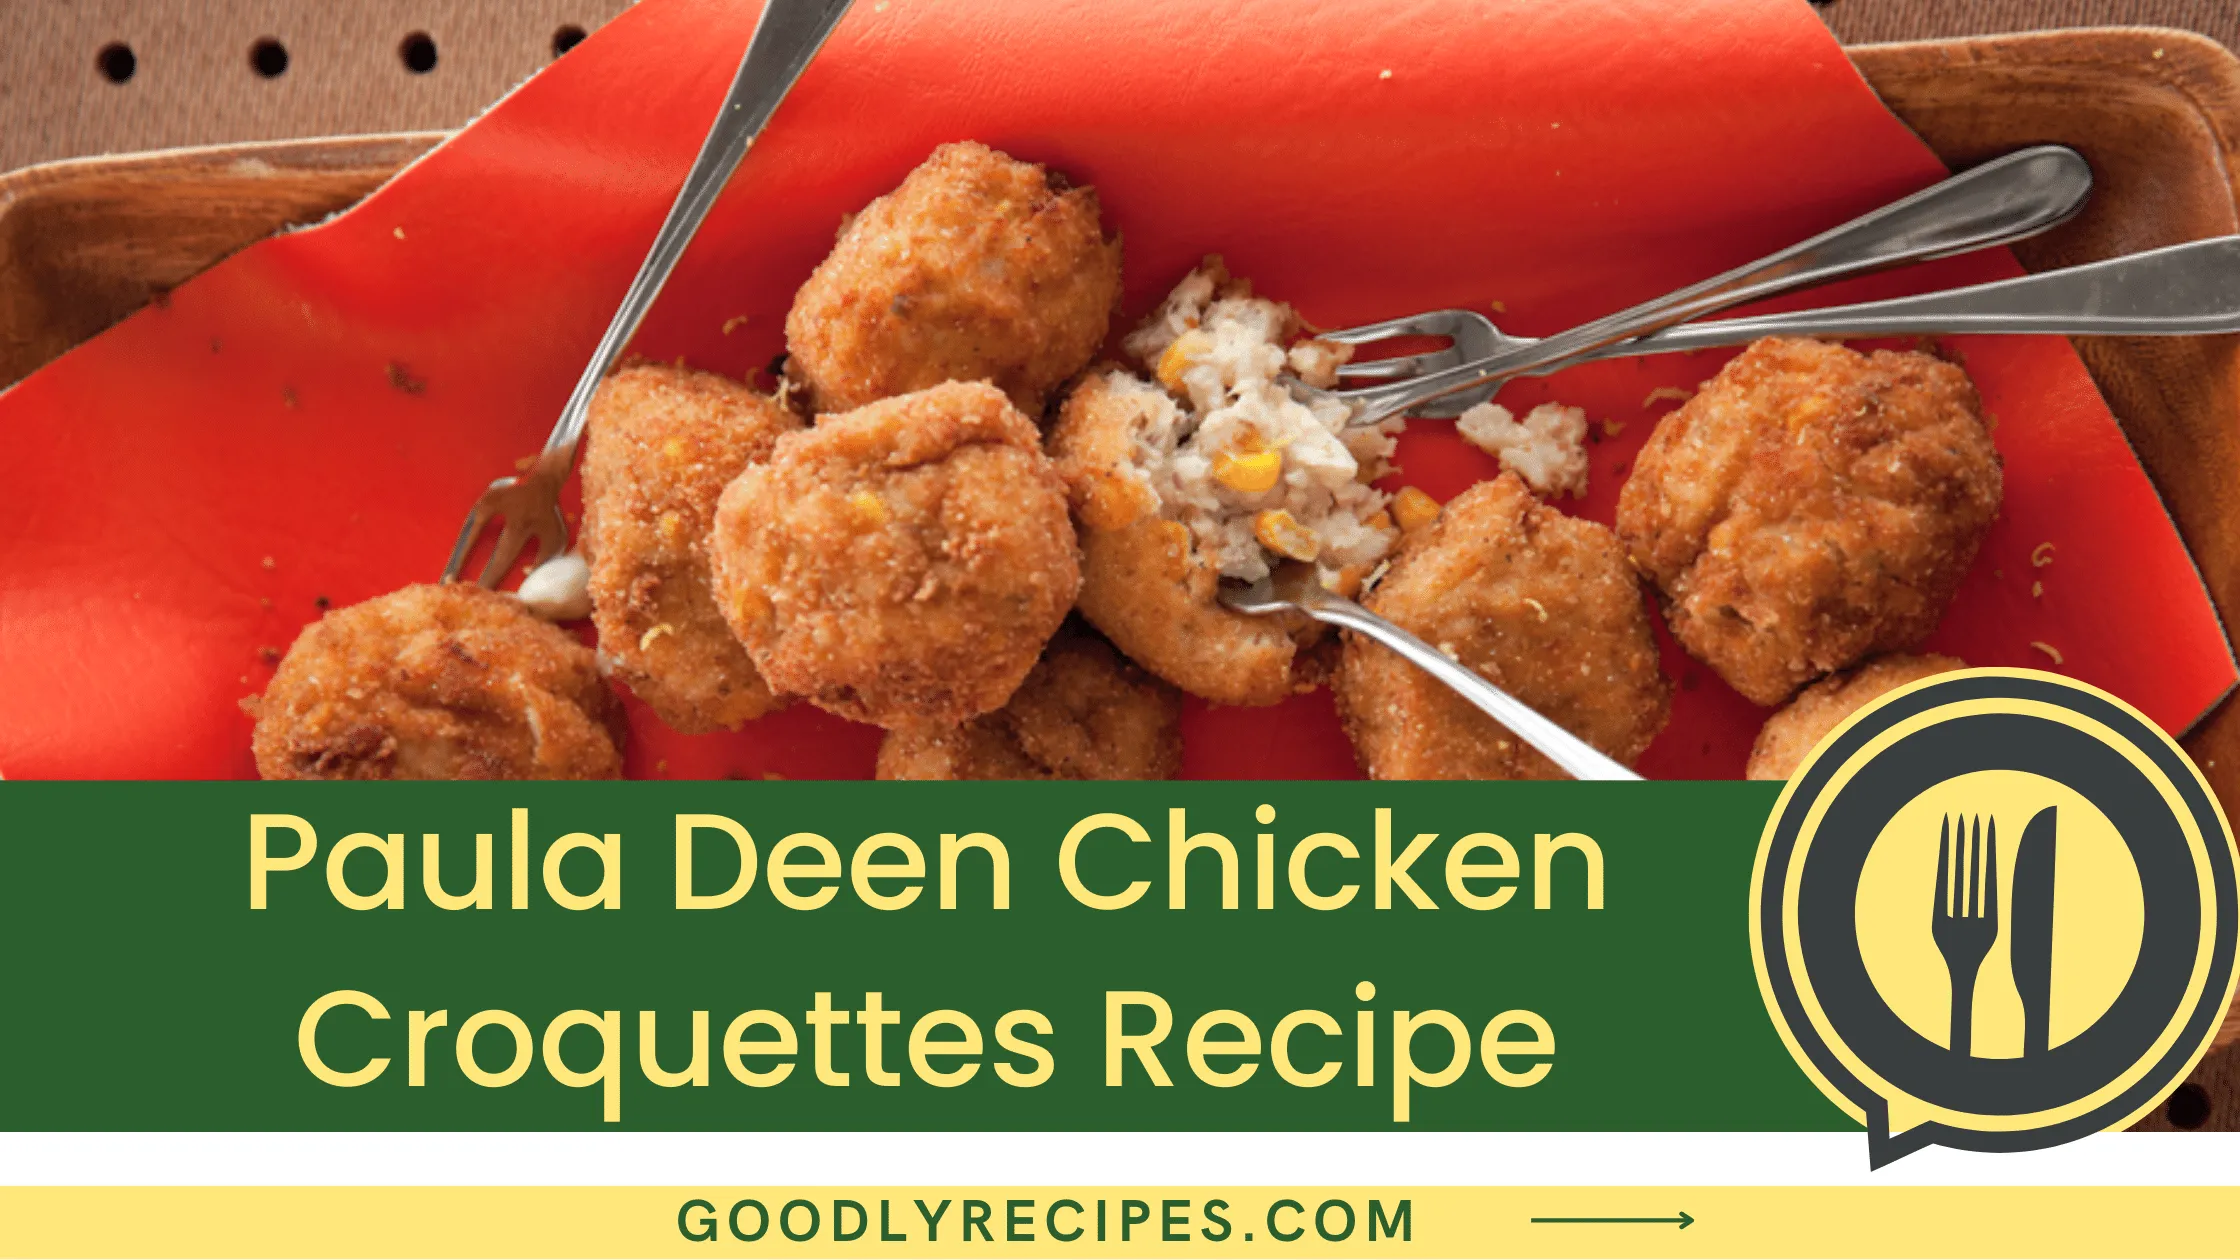 What is Paula Deen Chicken Croquettes?